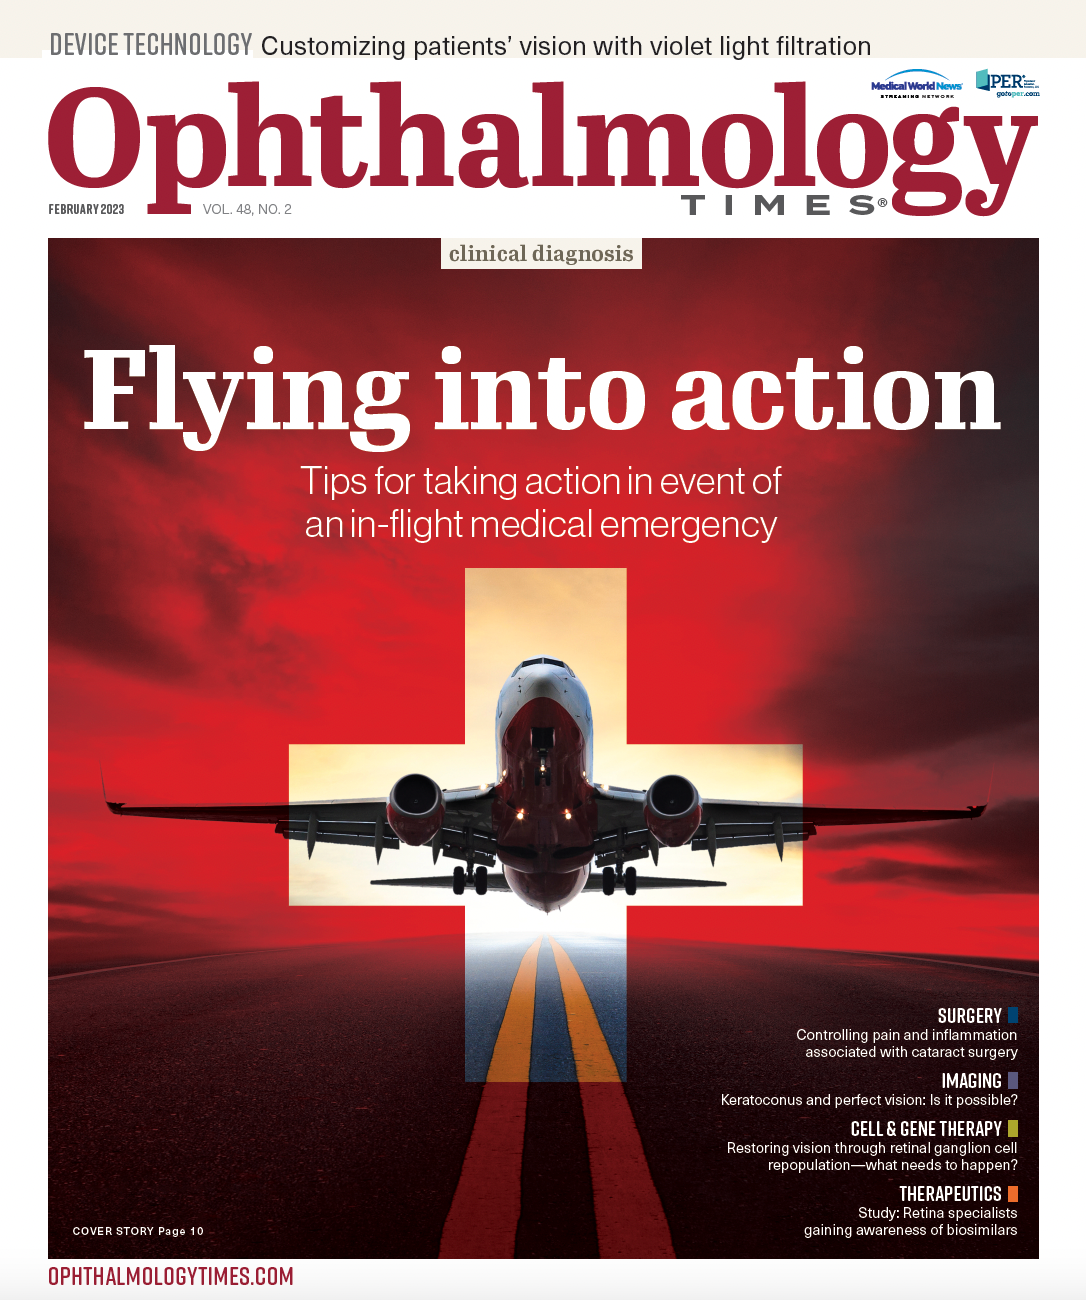 Ophthalmology Times: February 2023